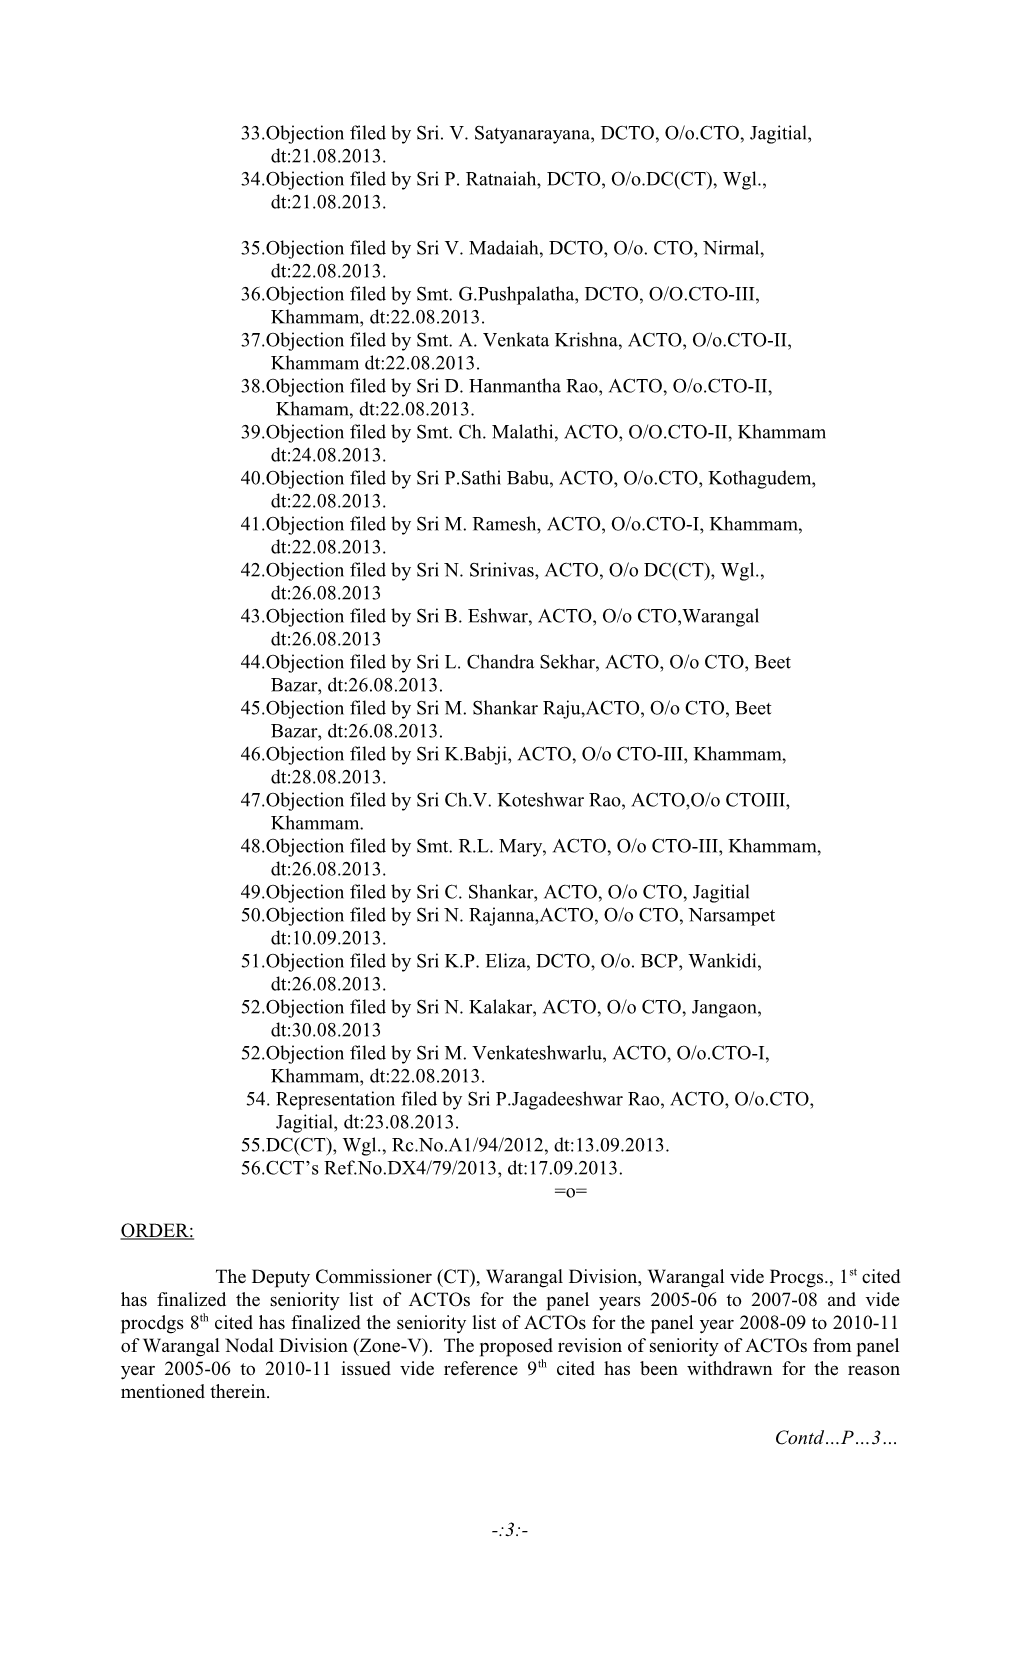 Proceedings of the Nodal Deputy Commissioner of Commercial Taxes, Warangal